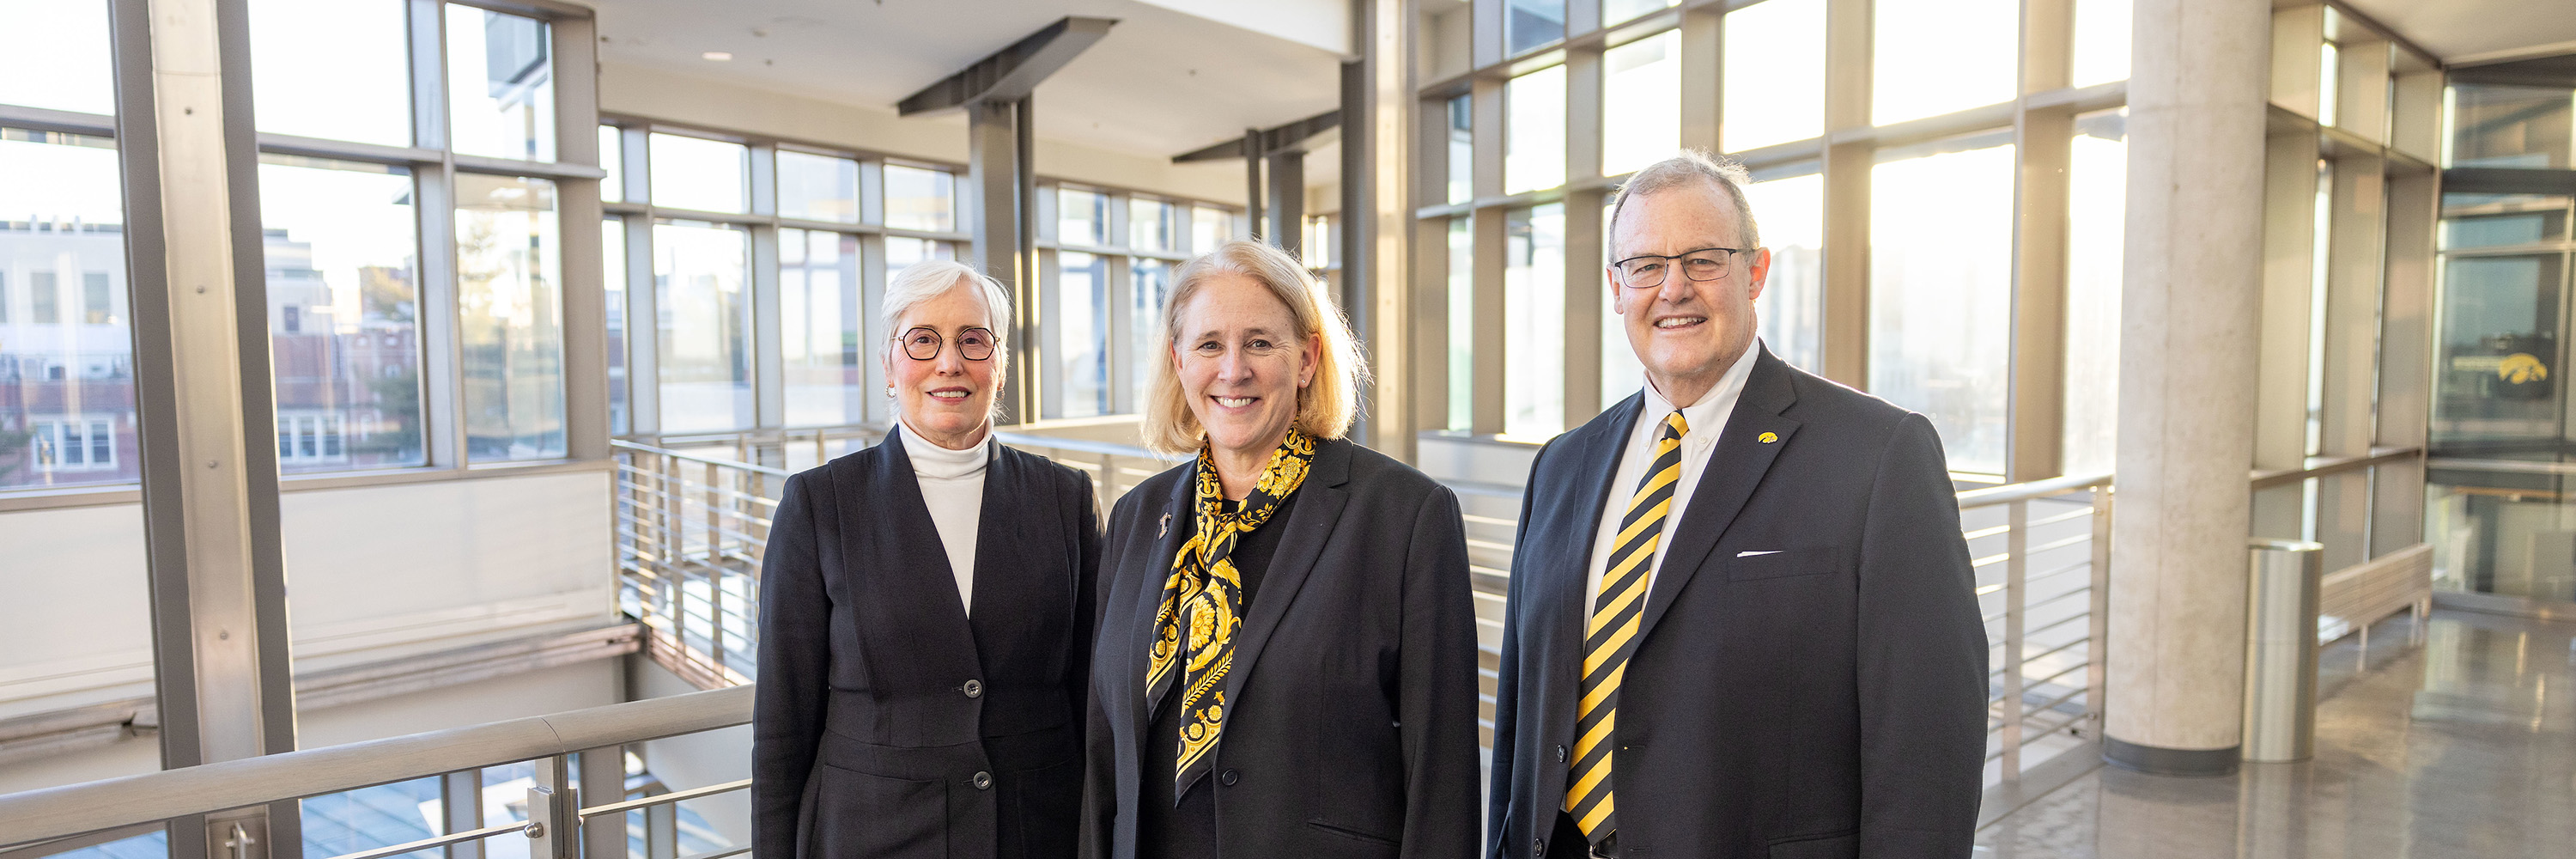 Honoring the individuals driving change at University of Iowa Health Care